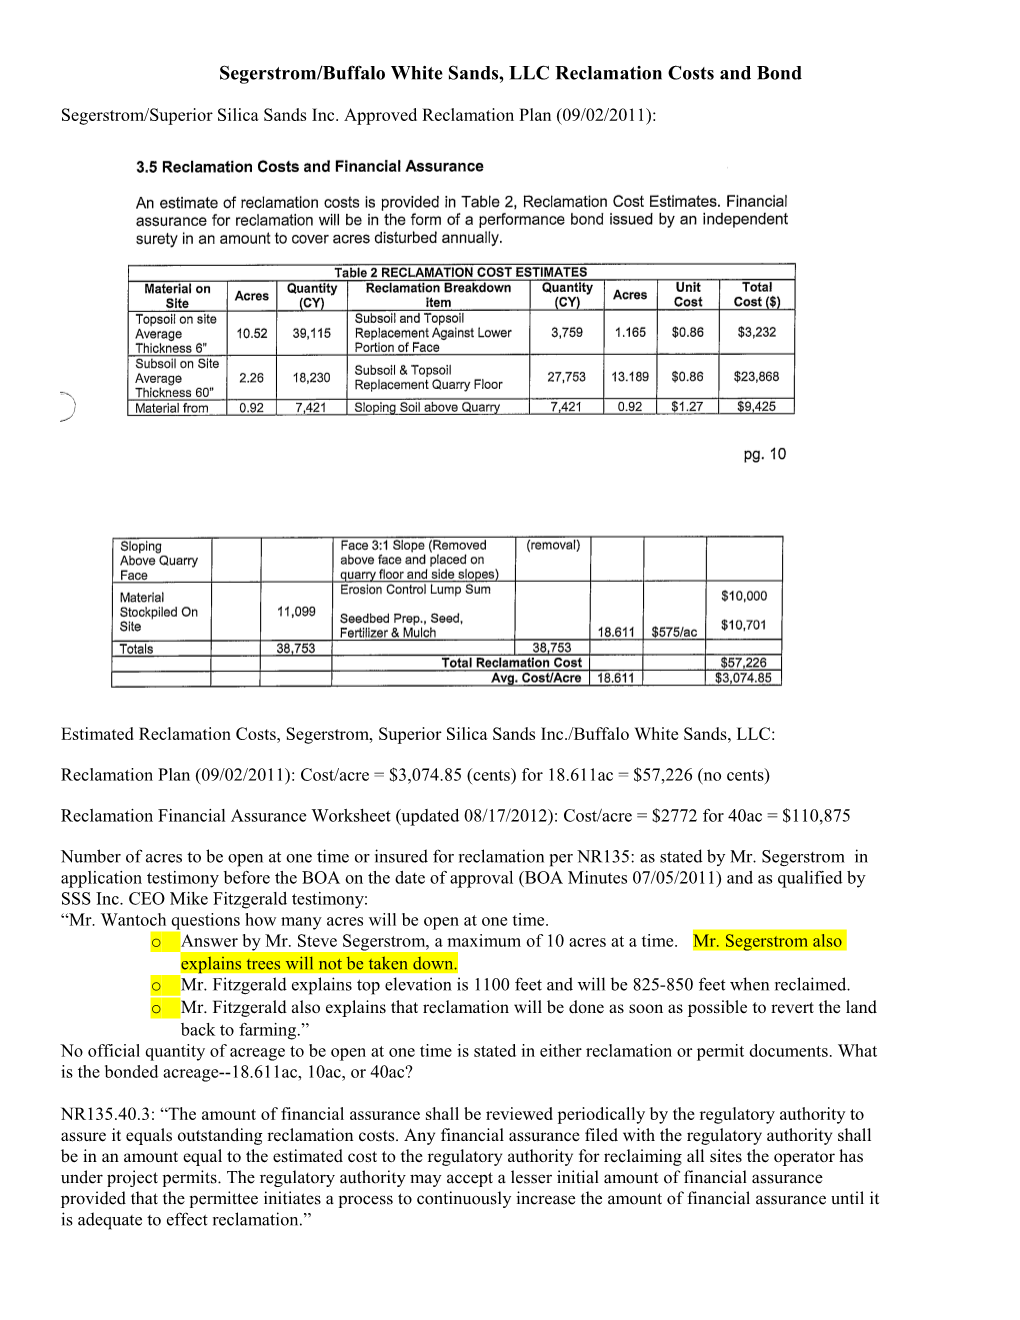 Segerstrom/Buffalo White Sands, LLC Reclamation Costs and Bond